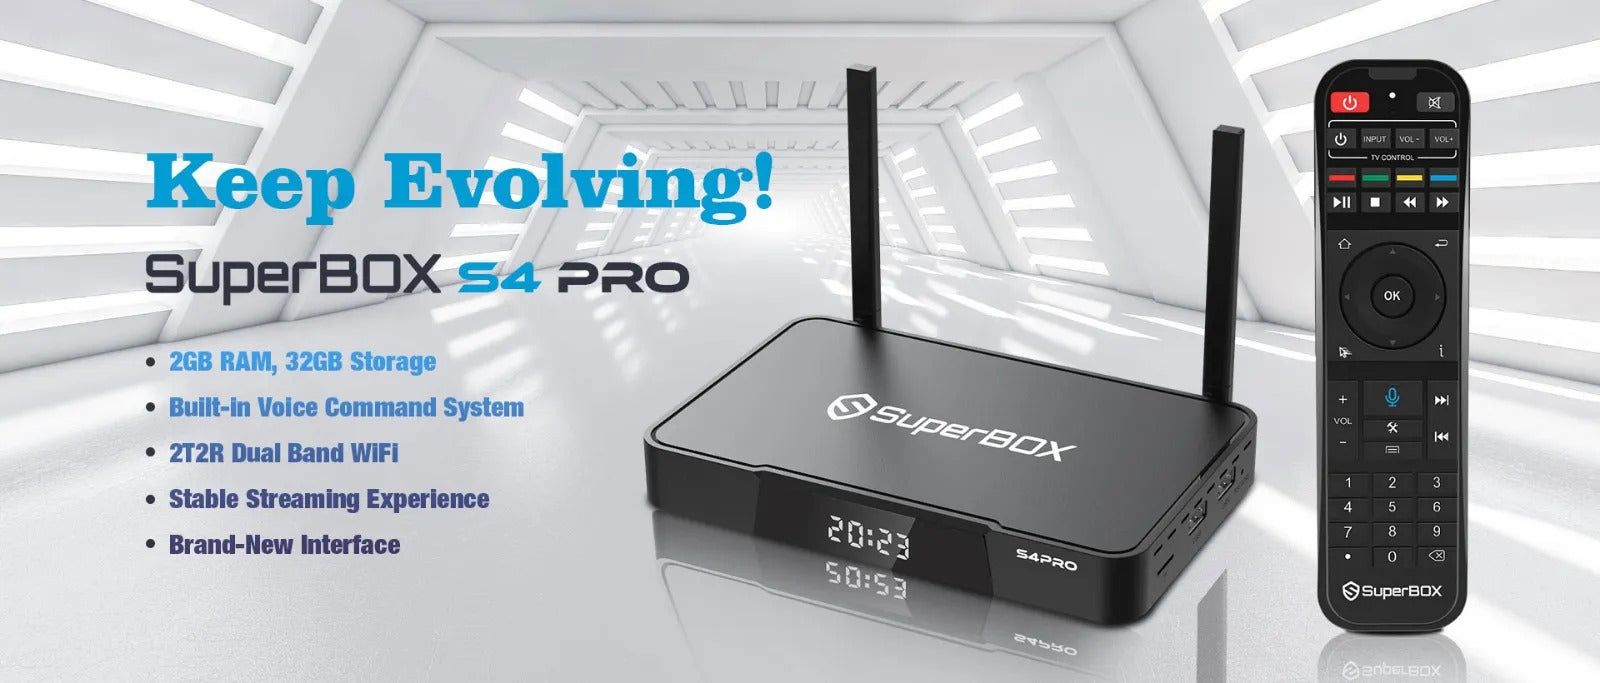 SuperBox S4 Pro - Wholesale / Reseller Packs of 20Units